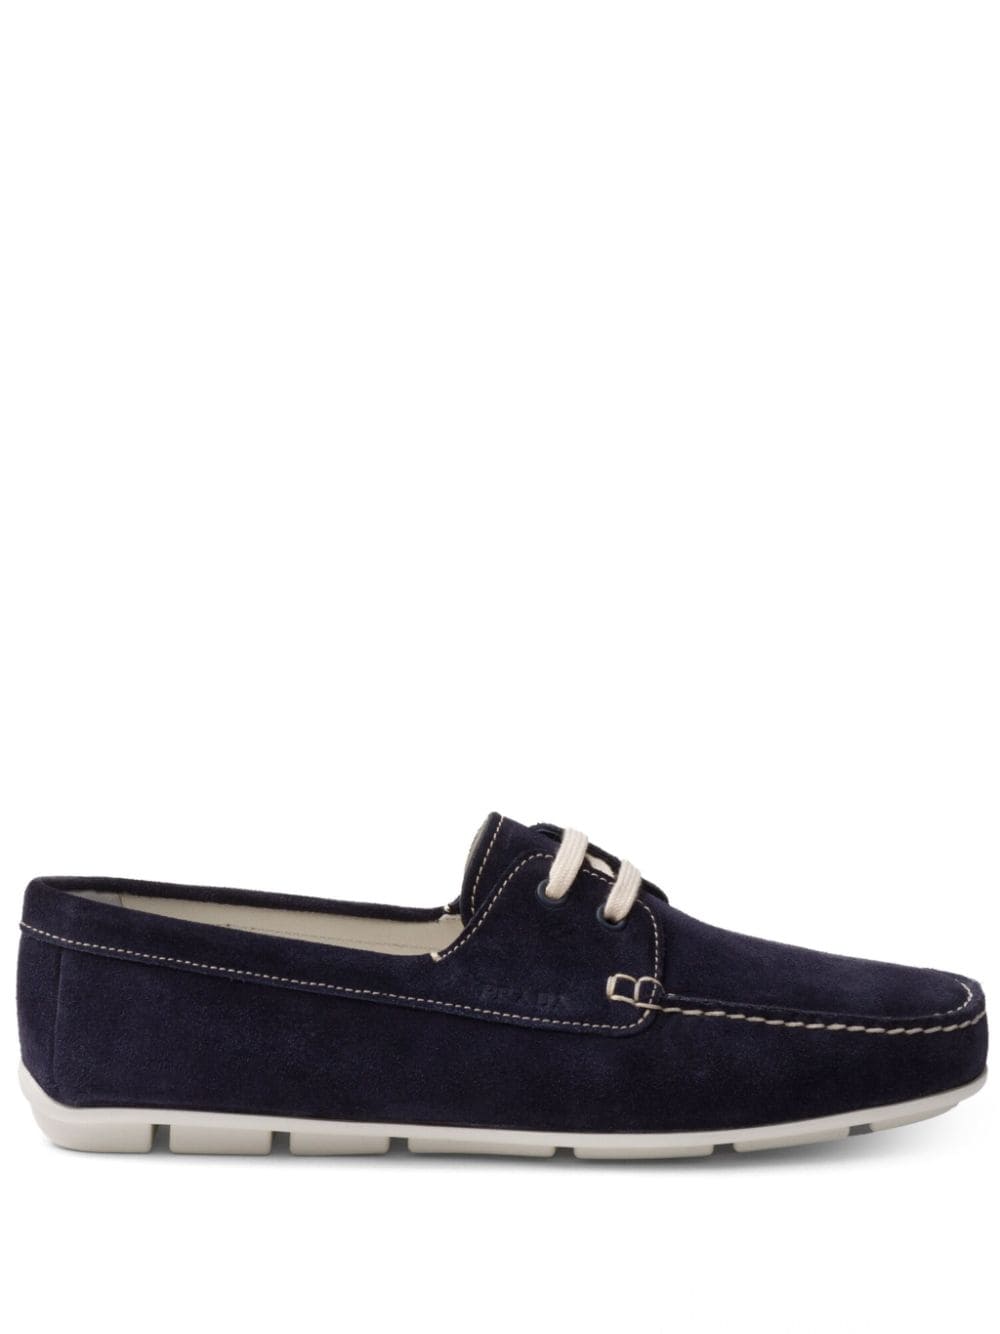 Prada Suede Driving Shoes In Navy